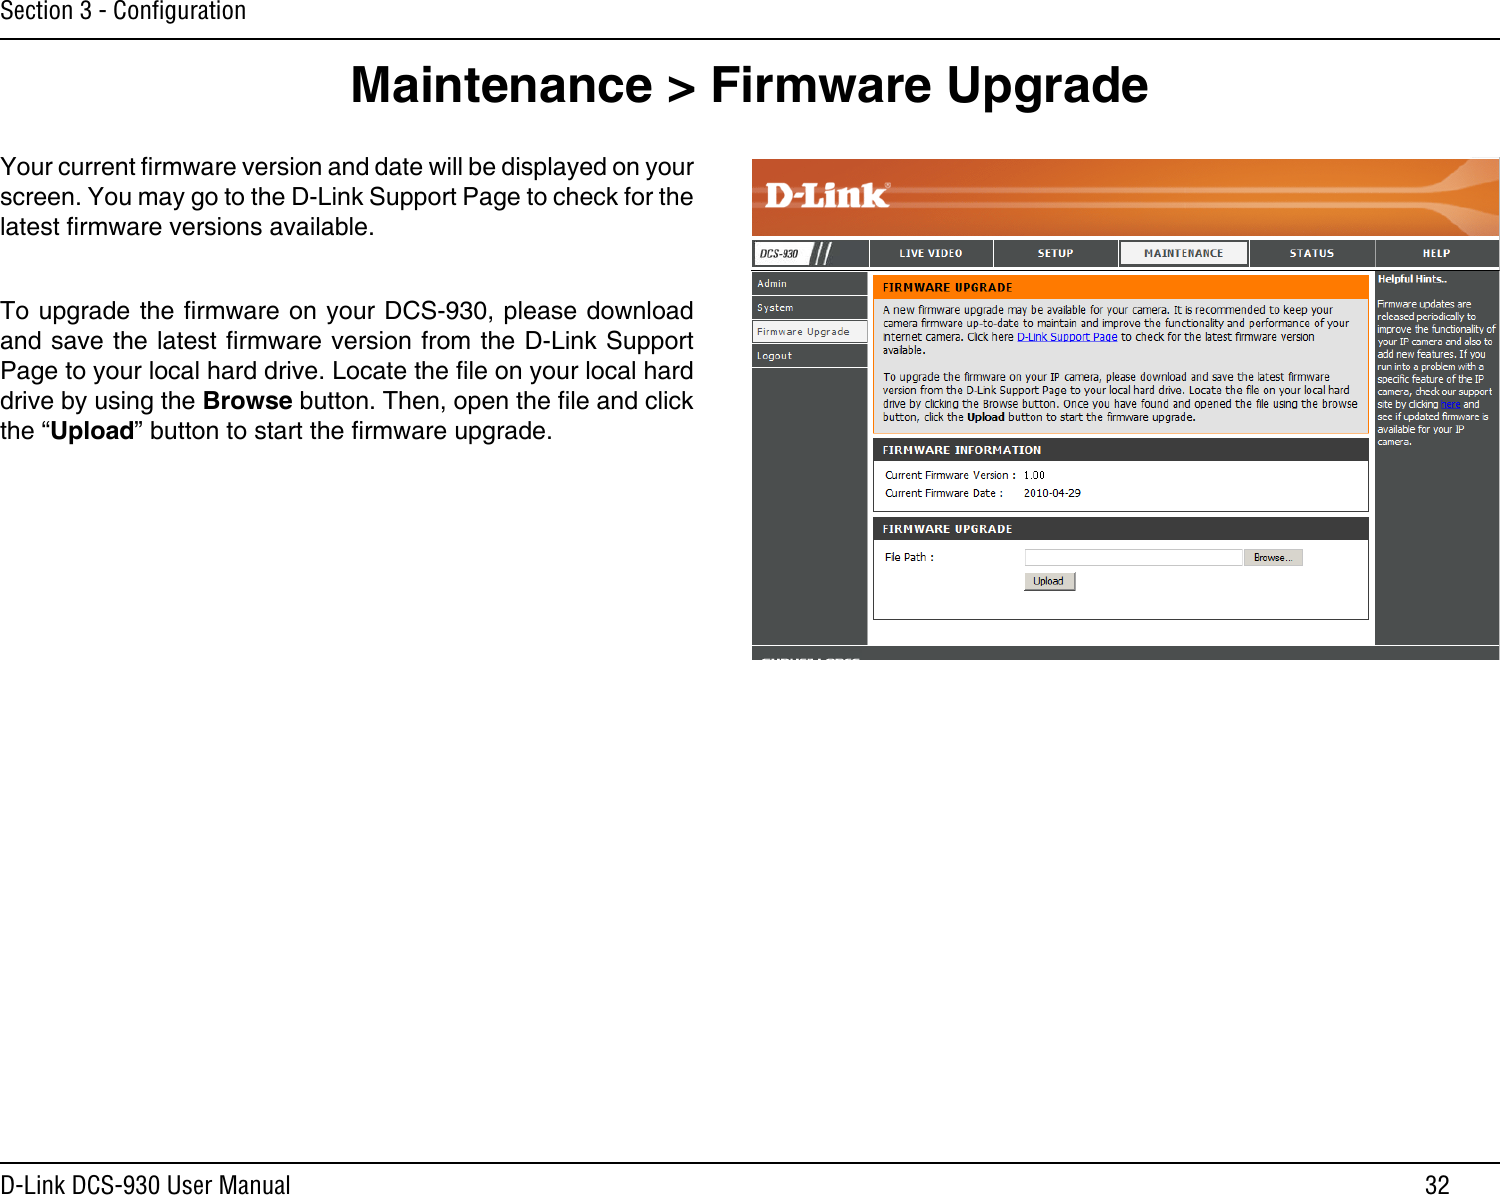 32D-Link DCS-930 User ManualSection 3 - ConﬁgurationMaintenance &gt; Firmware UpgradeYour current rmware version and date will be displayed on your screen. You may go to the D-Link Support Page to check for the latest rmware versions available. To upgrade the rmware on your DCS-930, please download and save the latest rmware version from the D-Link Support Page to your local hard drive. Locate the le on your local hard drive by using the Browse button. Then, open the le and click the “Upload” button to start the rmware upgrade.